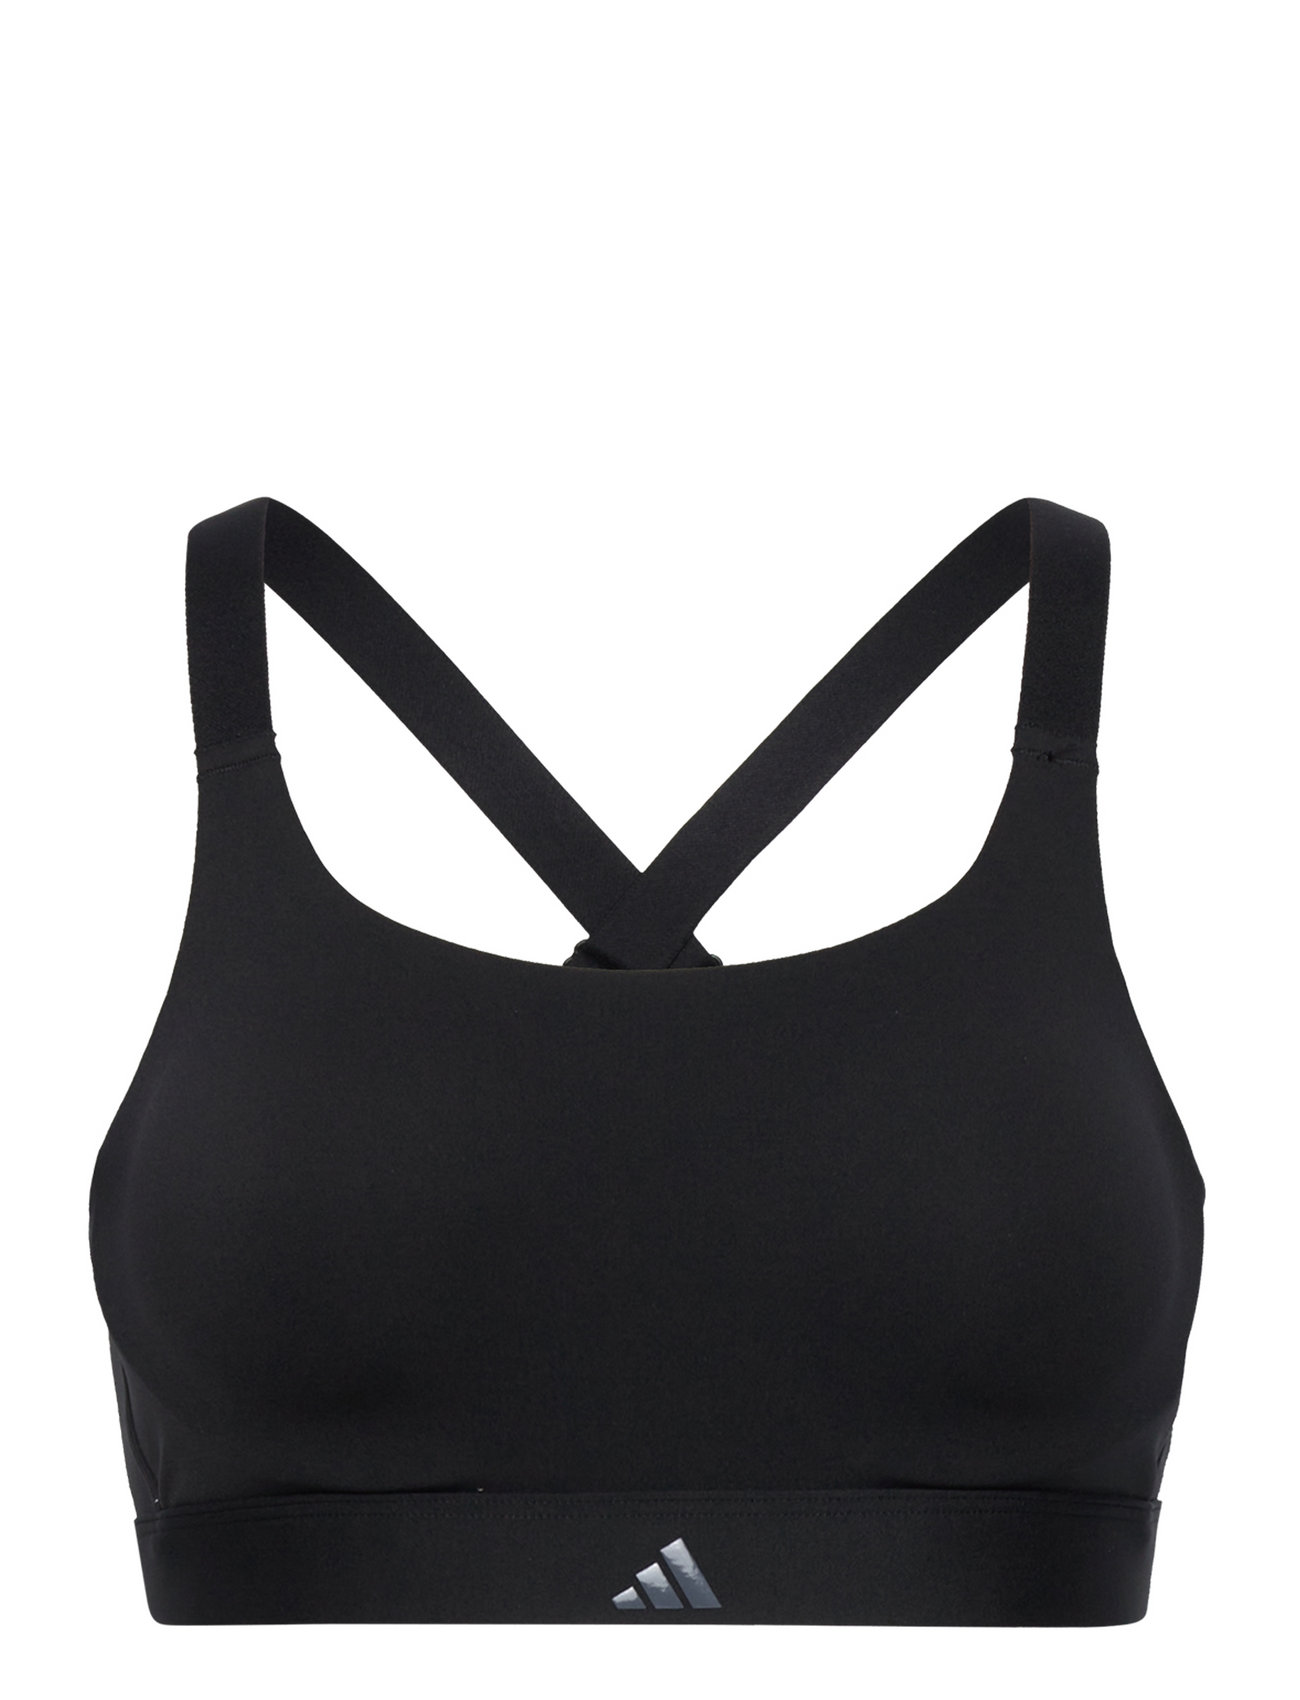 Tailored Impact Luxe Training High-Support Bra Sport Bras & Tops Sports Bras - All Black Adidas Performance